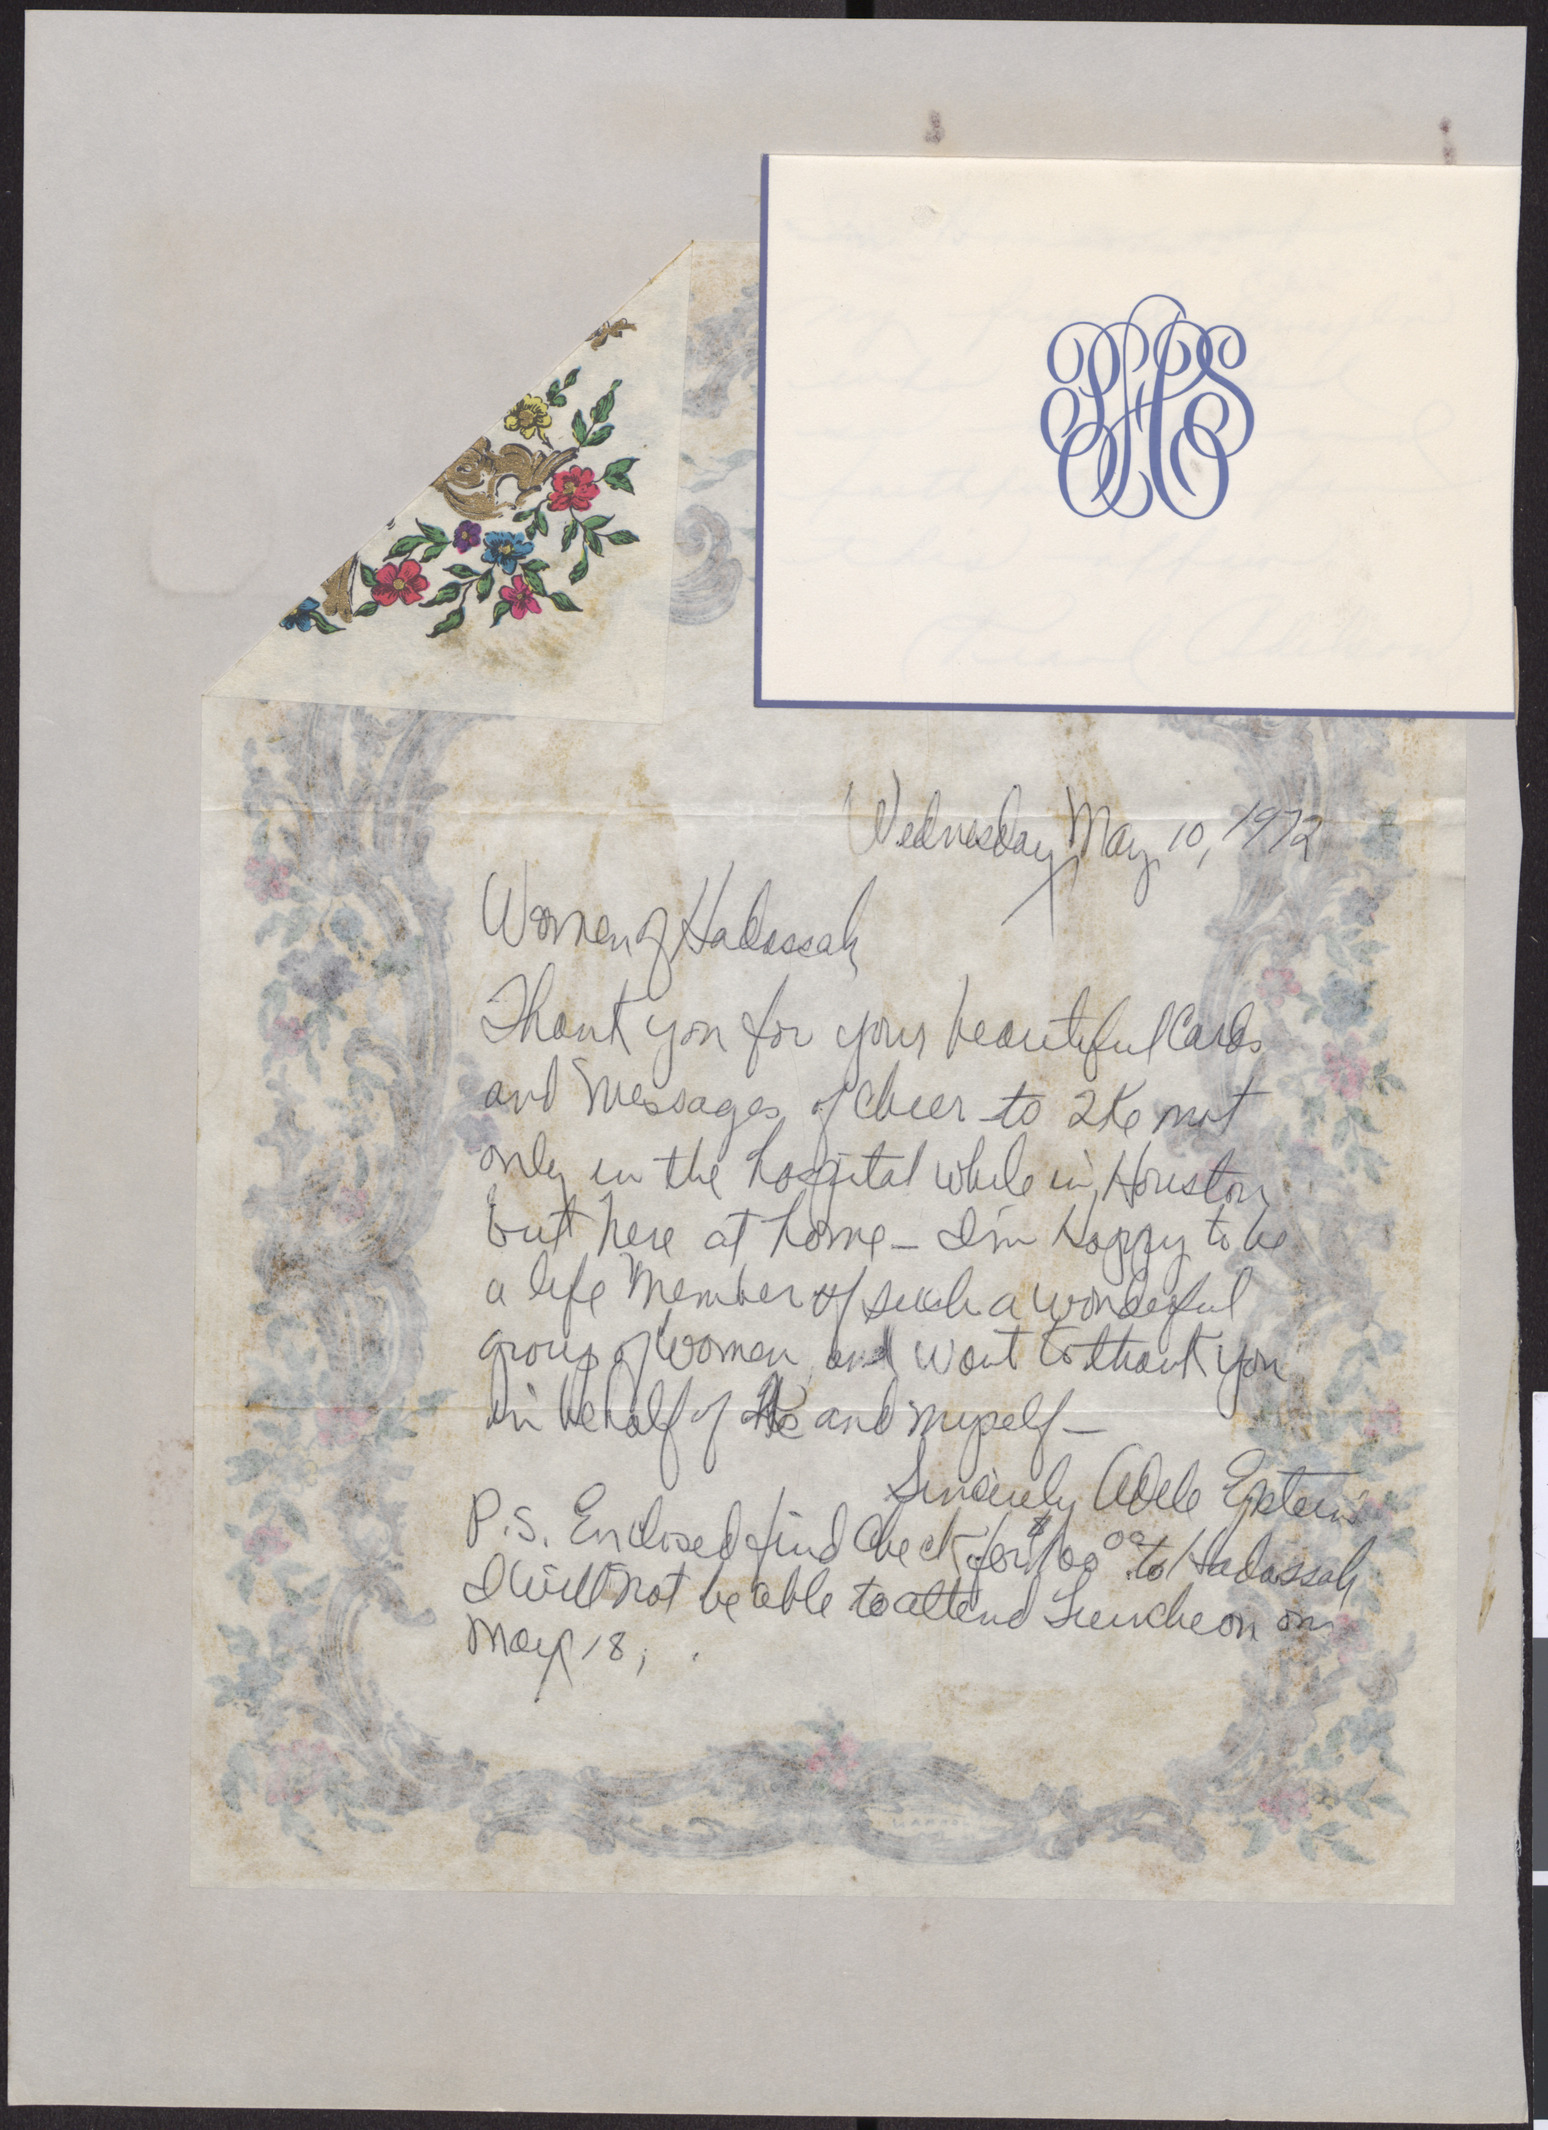 Handwritten letter from Adele Epstein to the Women of Hadassah, May 10, 1972, and mongrammed notecard